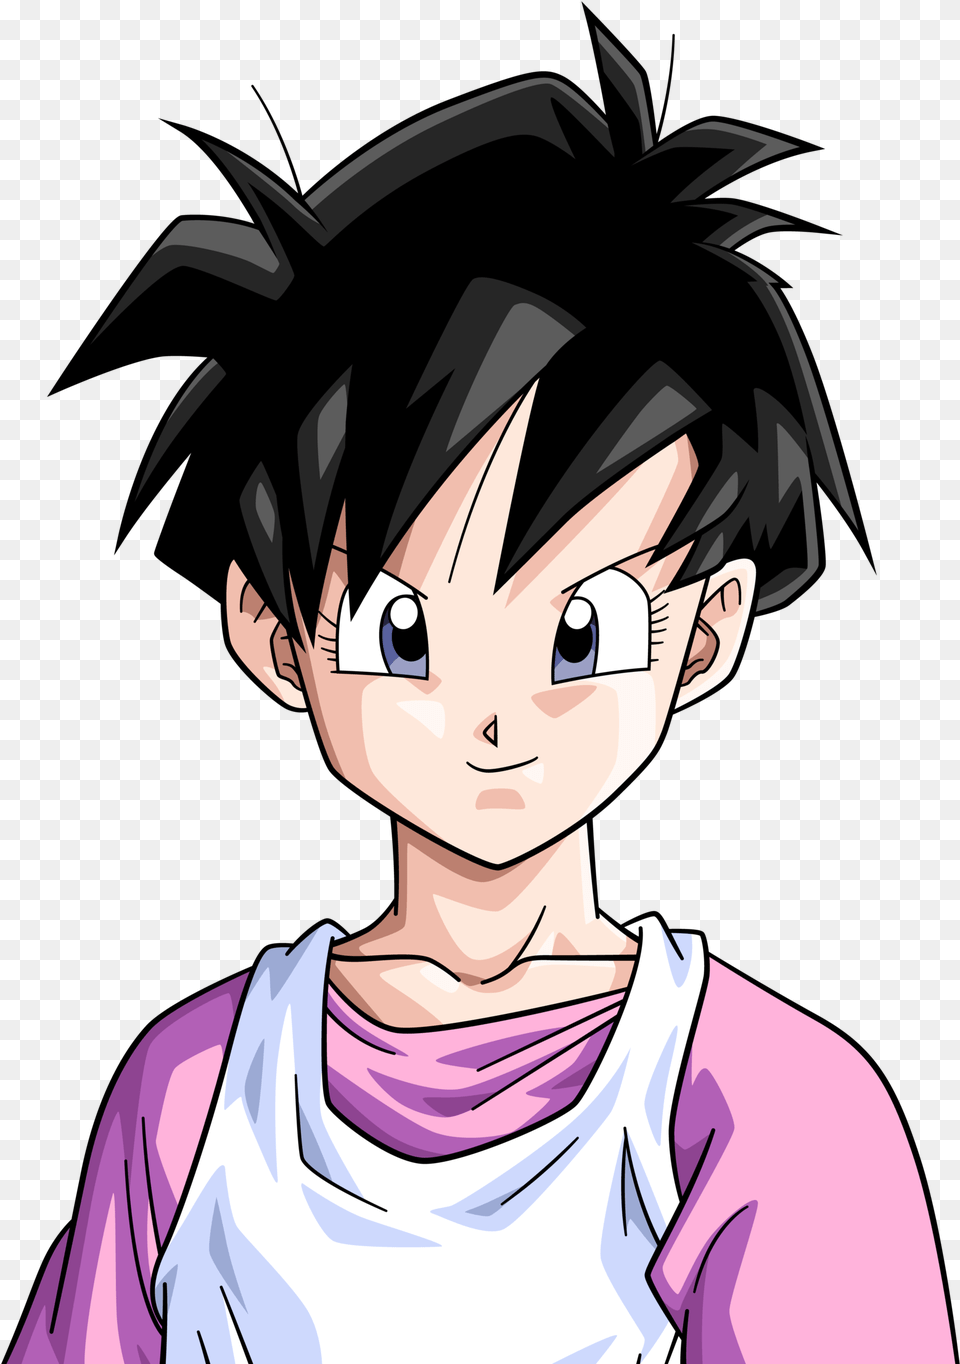 Best Of These Human Dbz Characters Dragon Ball Z Budokai 3 Videls, Publication, Book, Comics, Adult Png Image